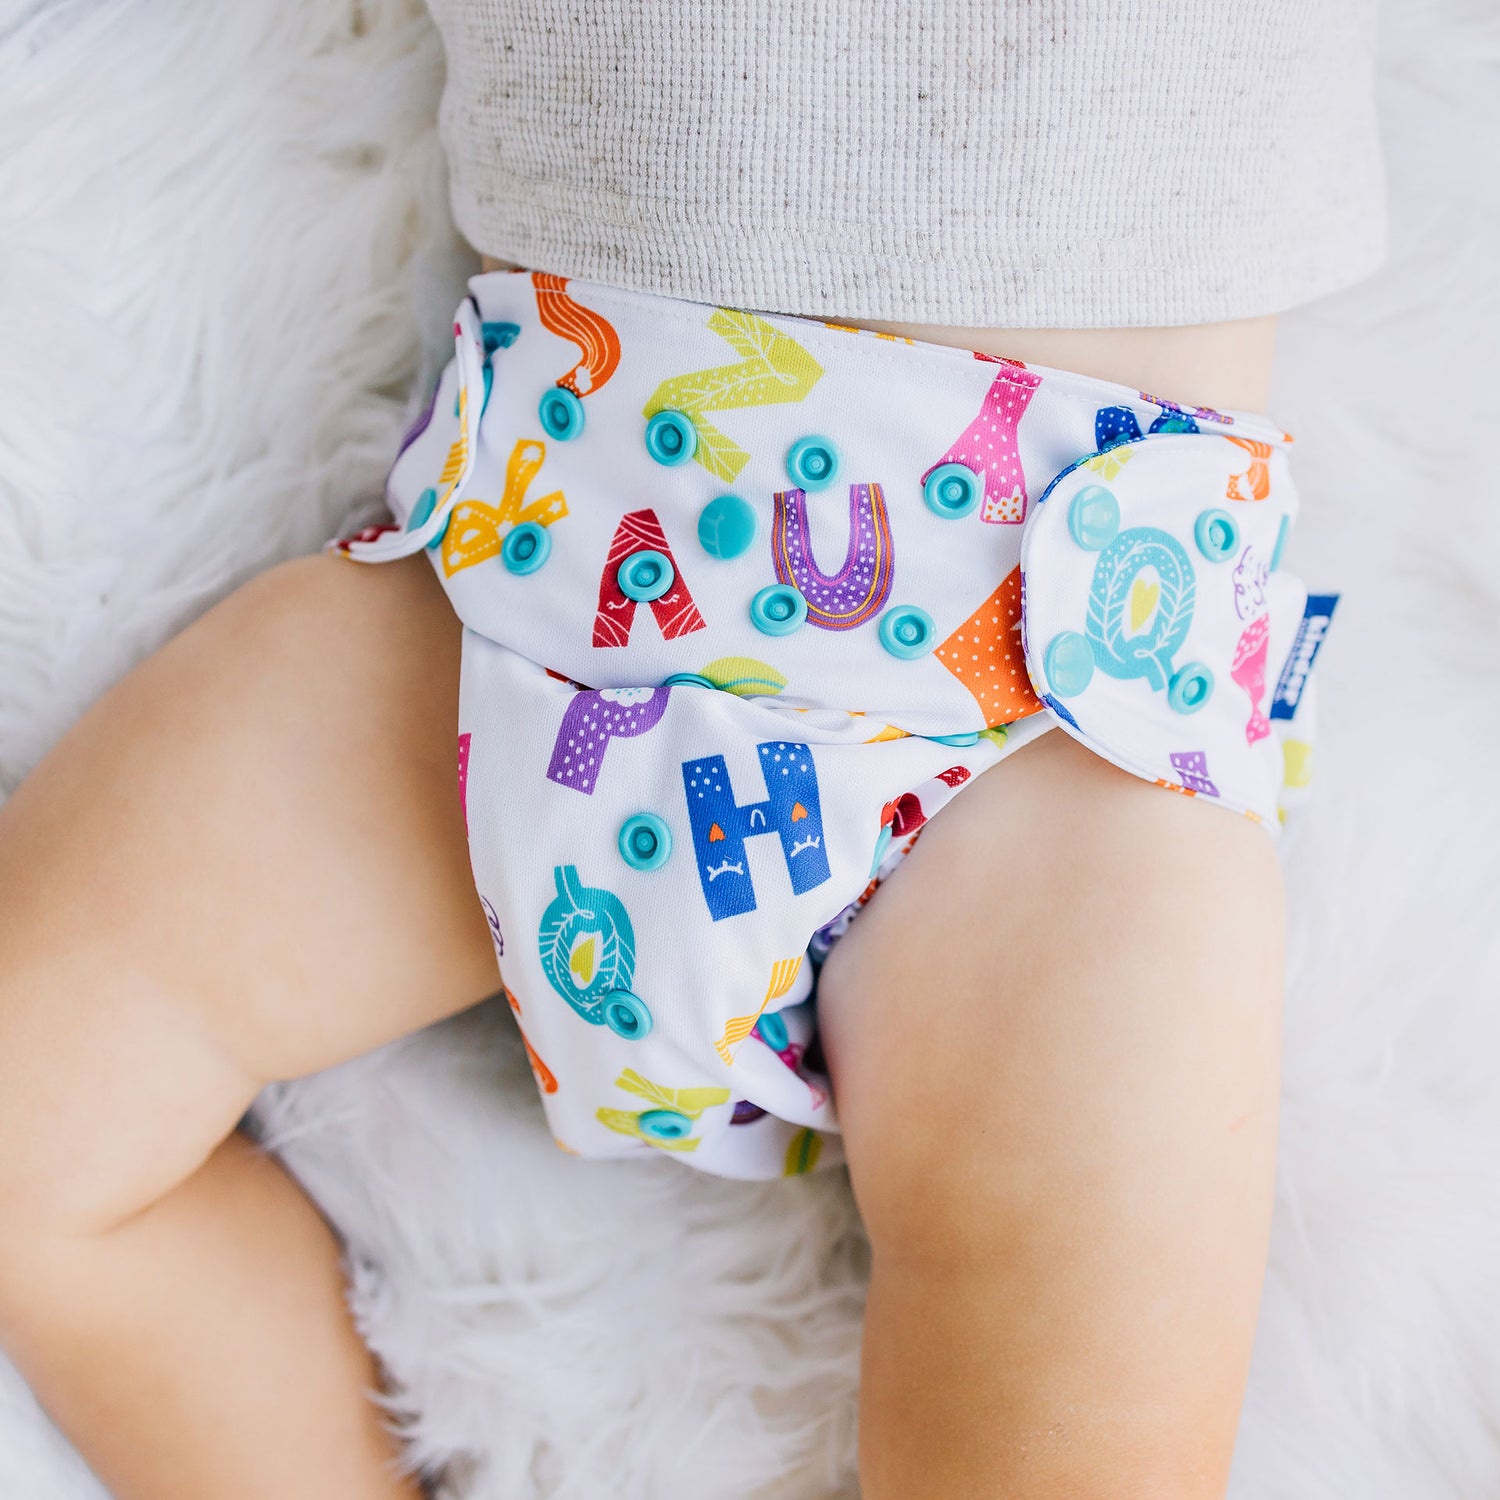 kinder cloth diaper co diapers for teens and adults and big kids